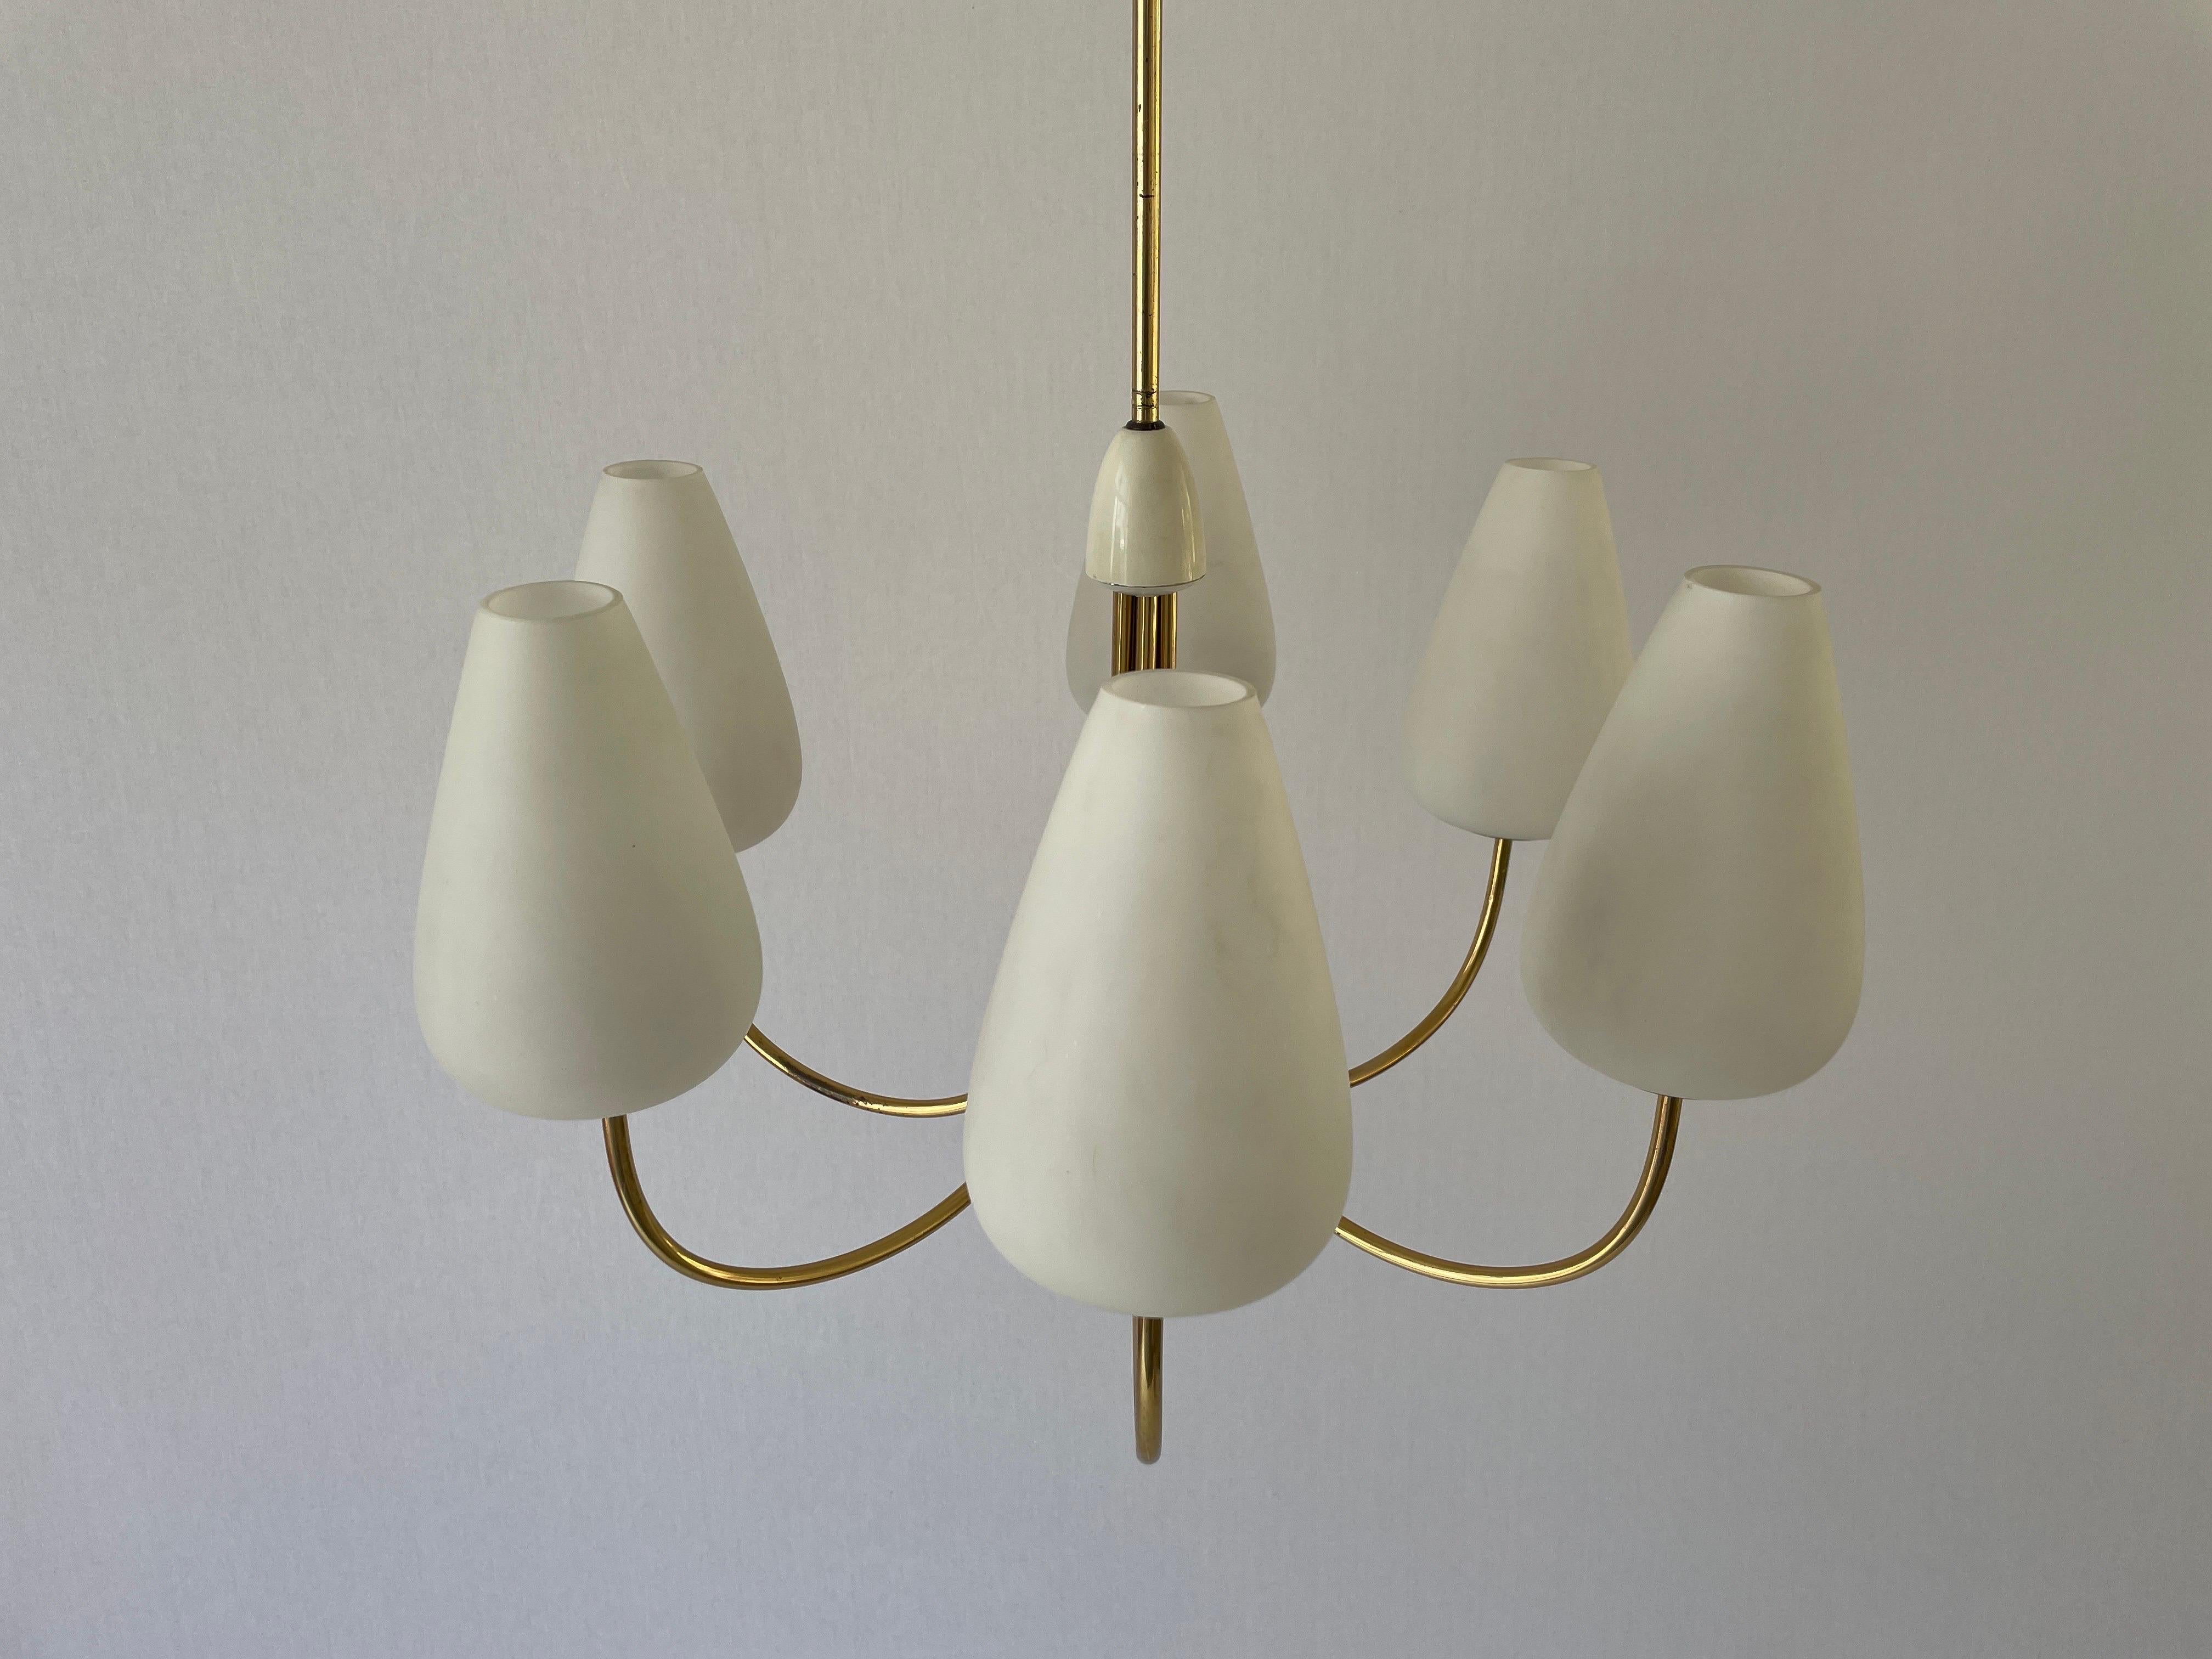 6-armed Glass and Brass Sputnik Chandelier by Kaiser Leuchten, Germany, 1960s 


This lamp works with 6 x E14 light bulbs.
Wired and suitable to use 110-220V in all countries.

Measures: 
Height: 66 cm
Overall shade diameter and height: 54 cm and 28